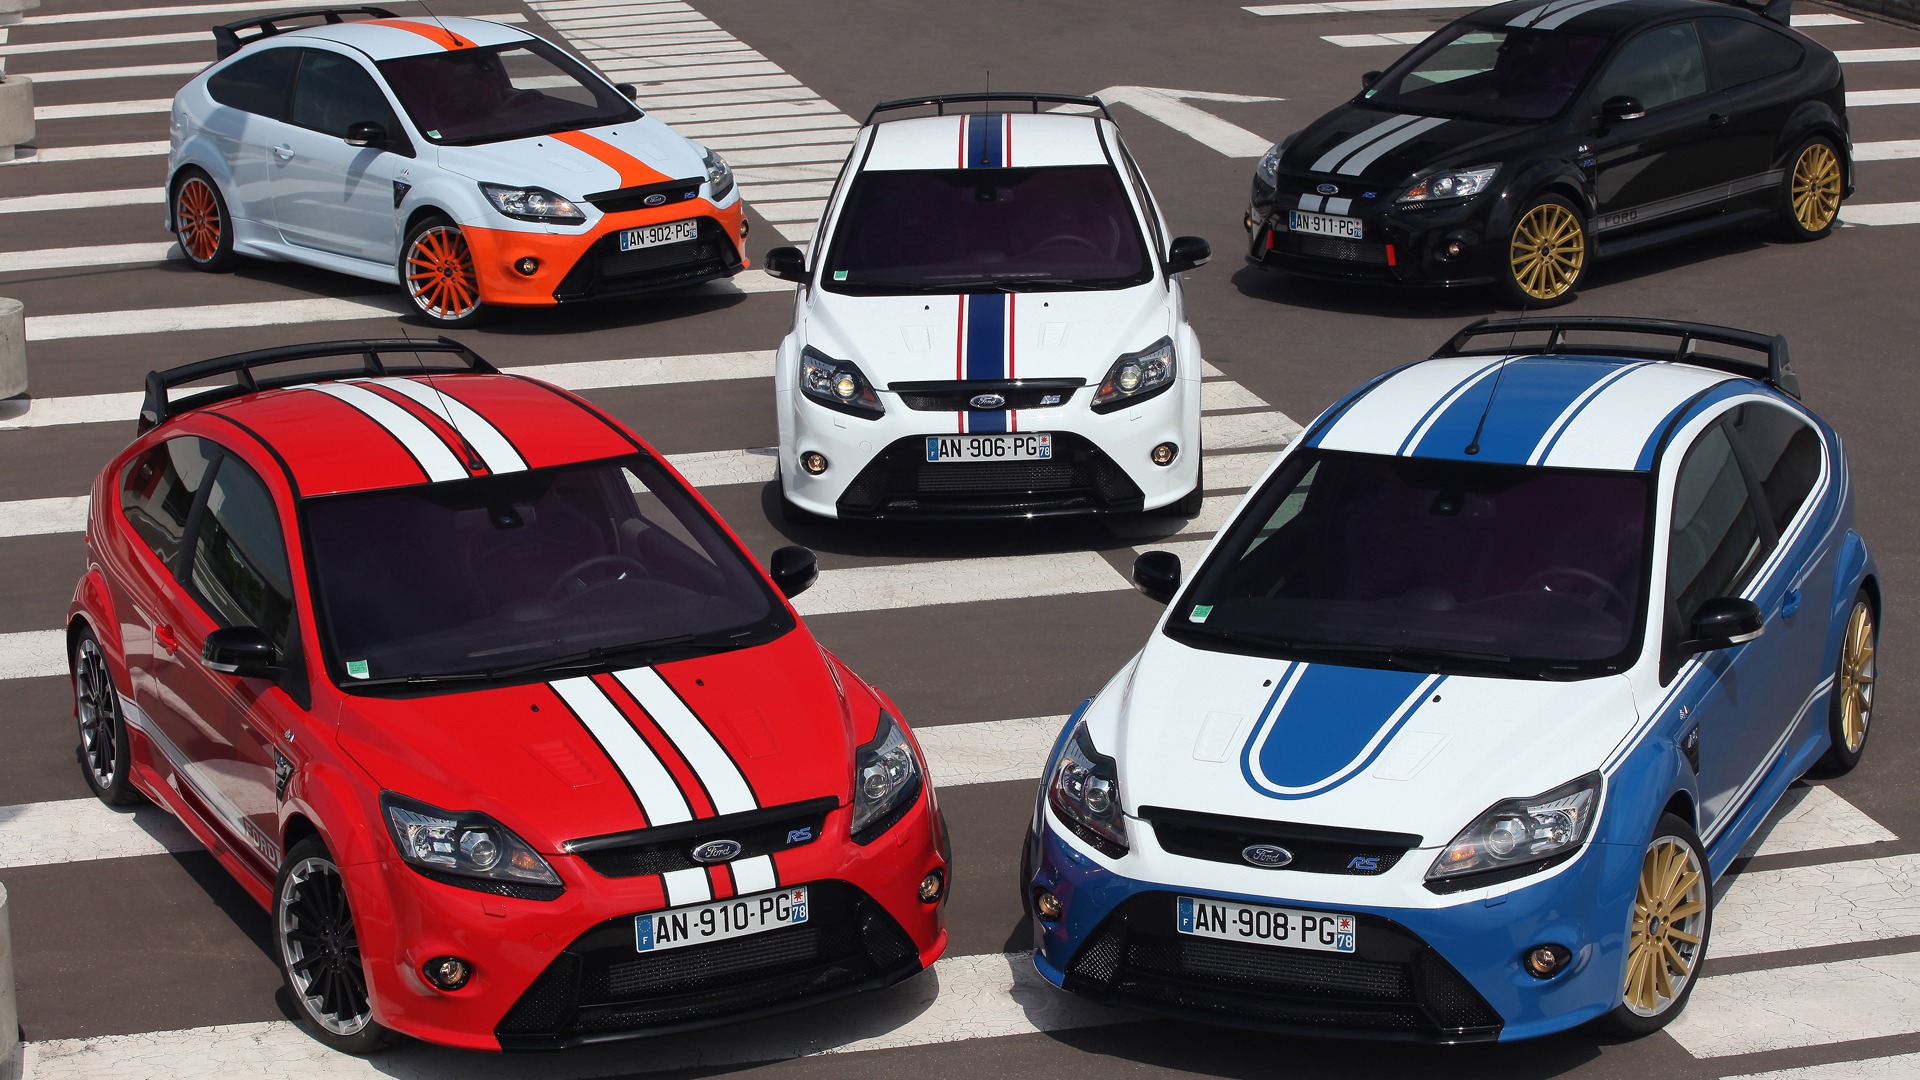 Ford Focus RS Le Mans Classic - 2010 福特11 - 1920x1080